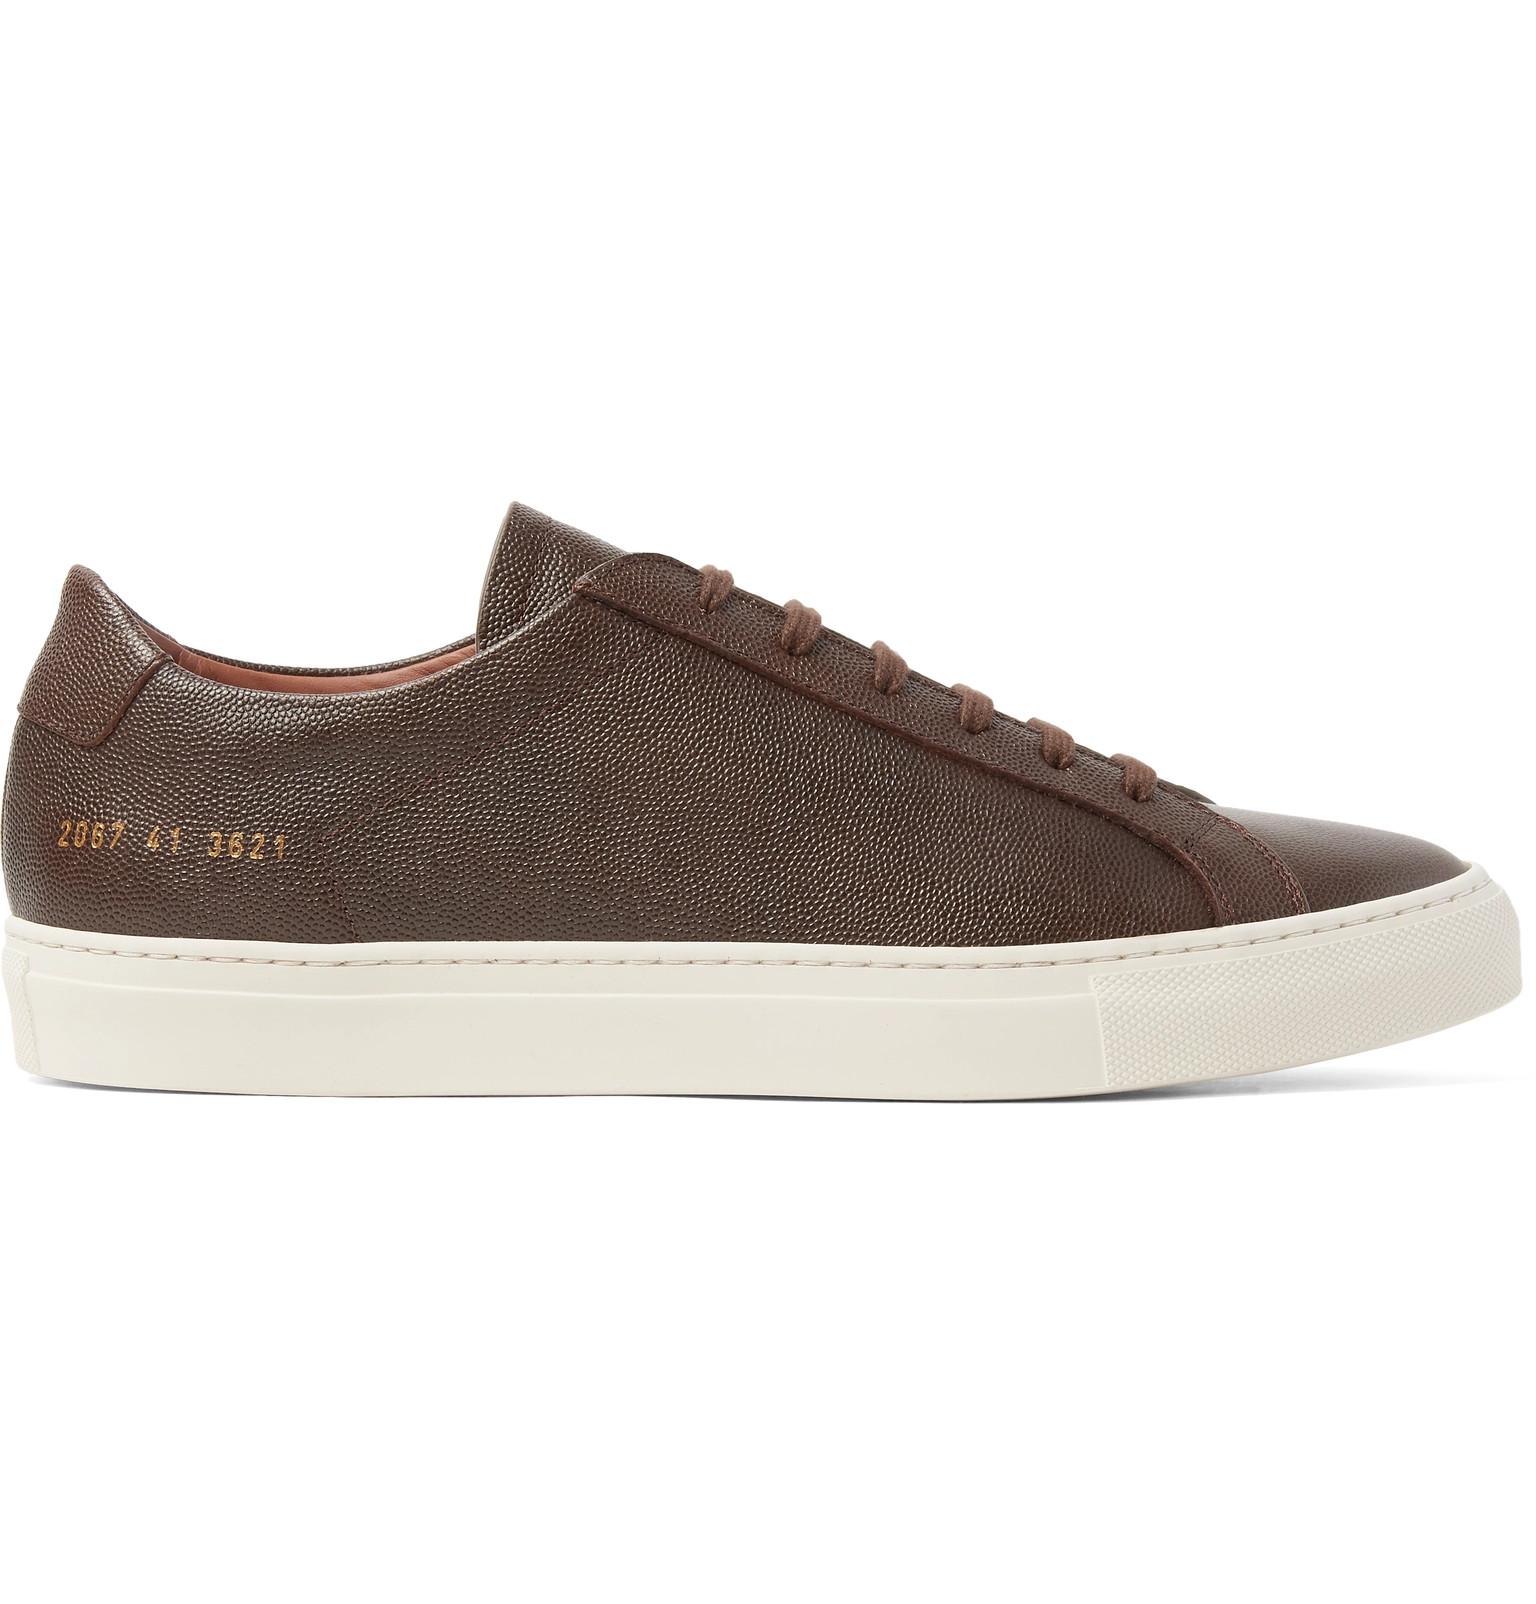 Common Projects Achilles Pebble-grain Leather Sneakers in Dark Brown ...